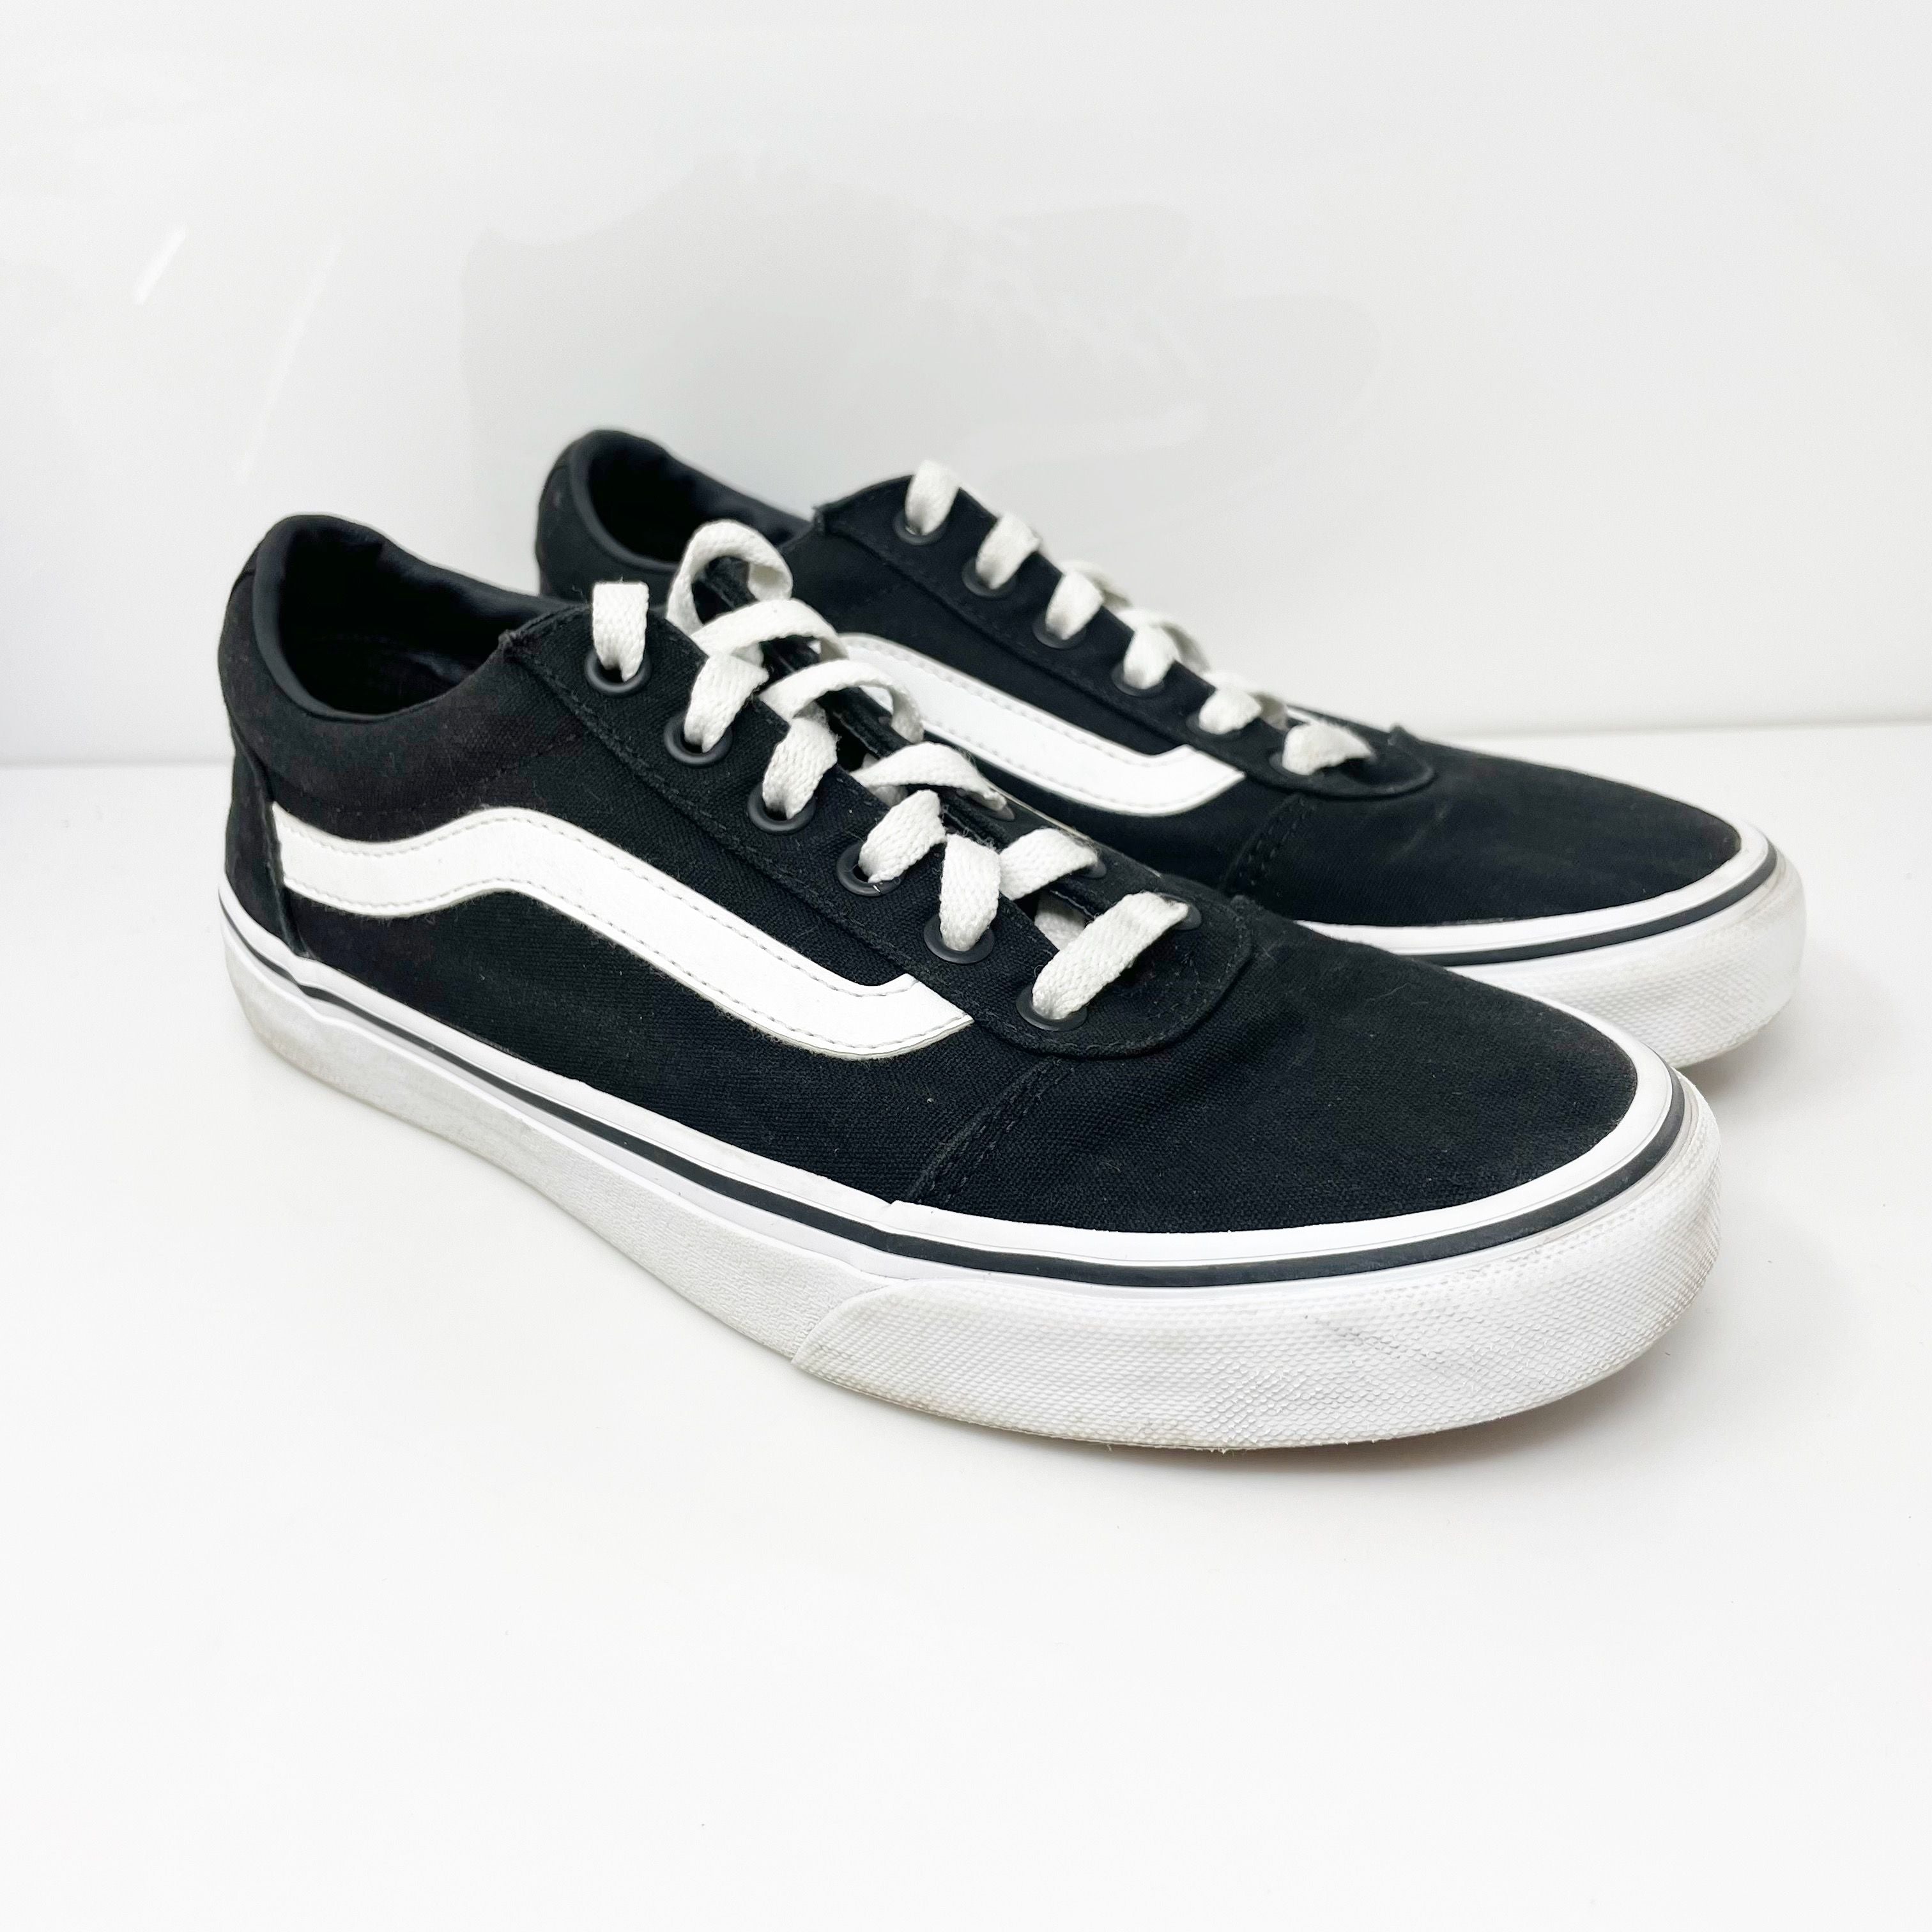 Vans Womens Ward 751505 Black Casual Shoes Sneakers Size 8.5– SneakerCycle